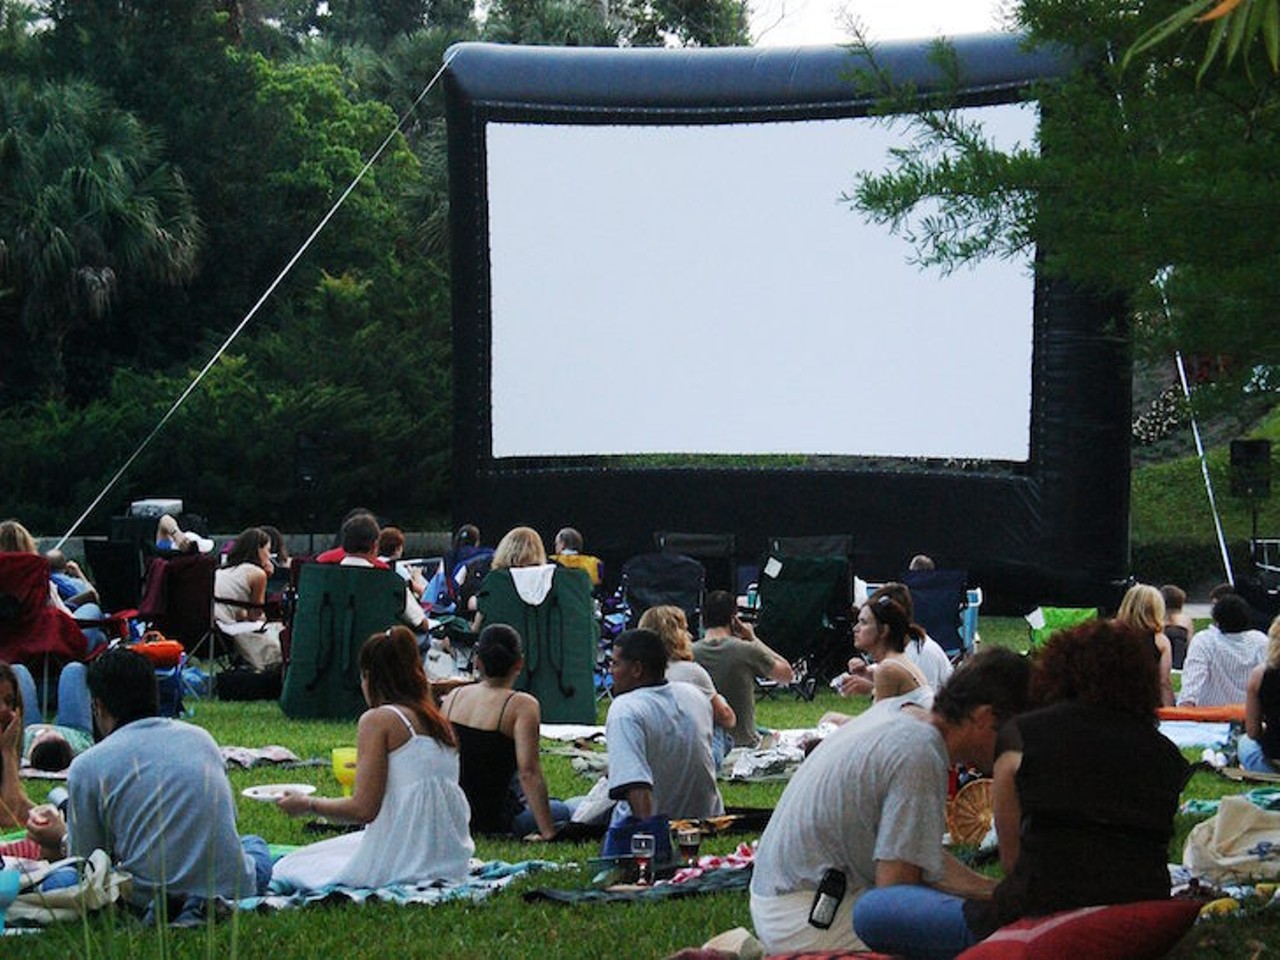 Mix drinks with screens at an outdoor movie at the Harry P. Leu Gardens
1920 N Forest Ave, Orlando, (407) 246-2620
While you&#146;re unable to have alcohol inside the gardens during the day, night events allow the booze. So, take your  S/O  to movie night with your drink of choice. 
Photo via Harry P. Leu Gardens/Facebook